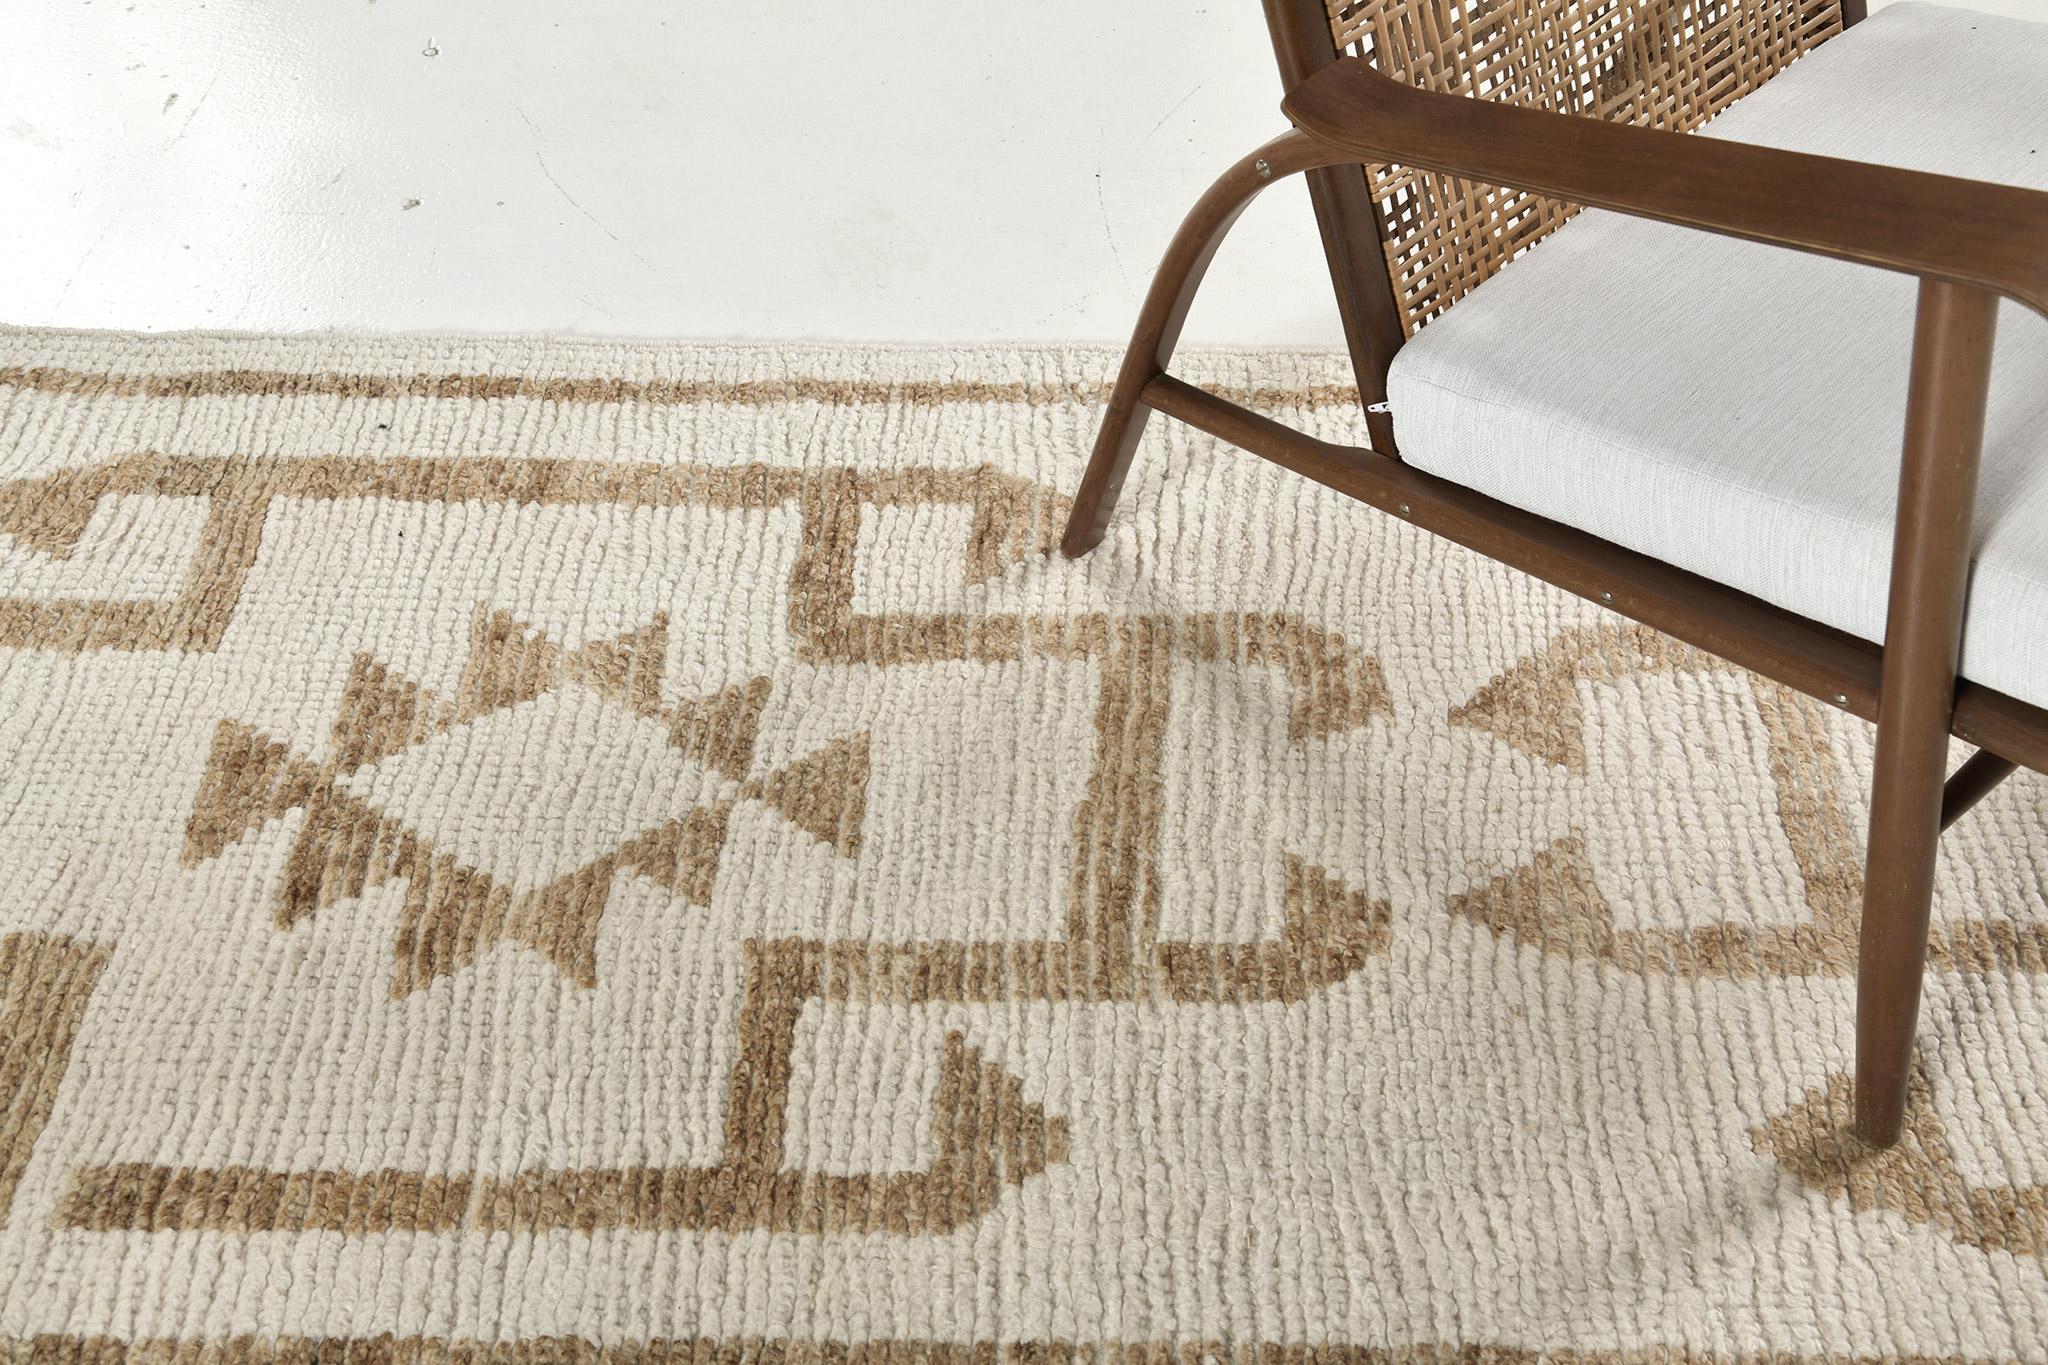 A gorgeous vintage Northwest Persian Kilim flatweave banded with neutral palette stripes. The varying degrees of stripes create a simple yet interesting design for a wide variety of interiors. Interestingly enough for your home interiors and room